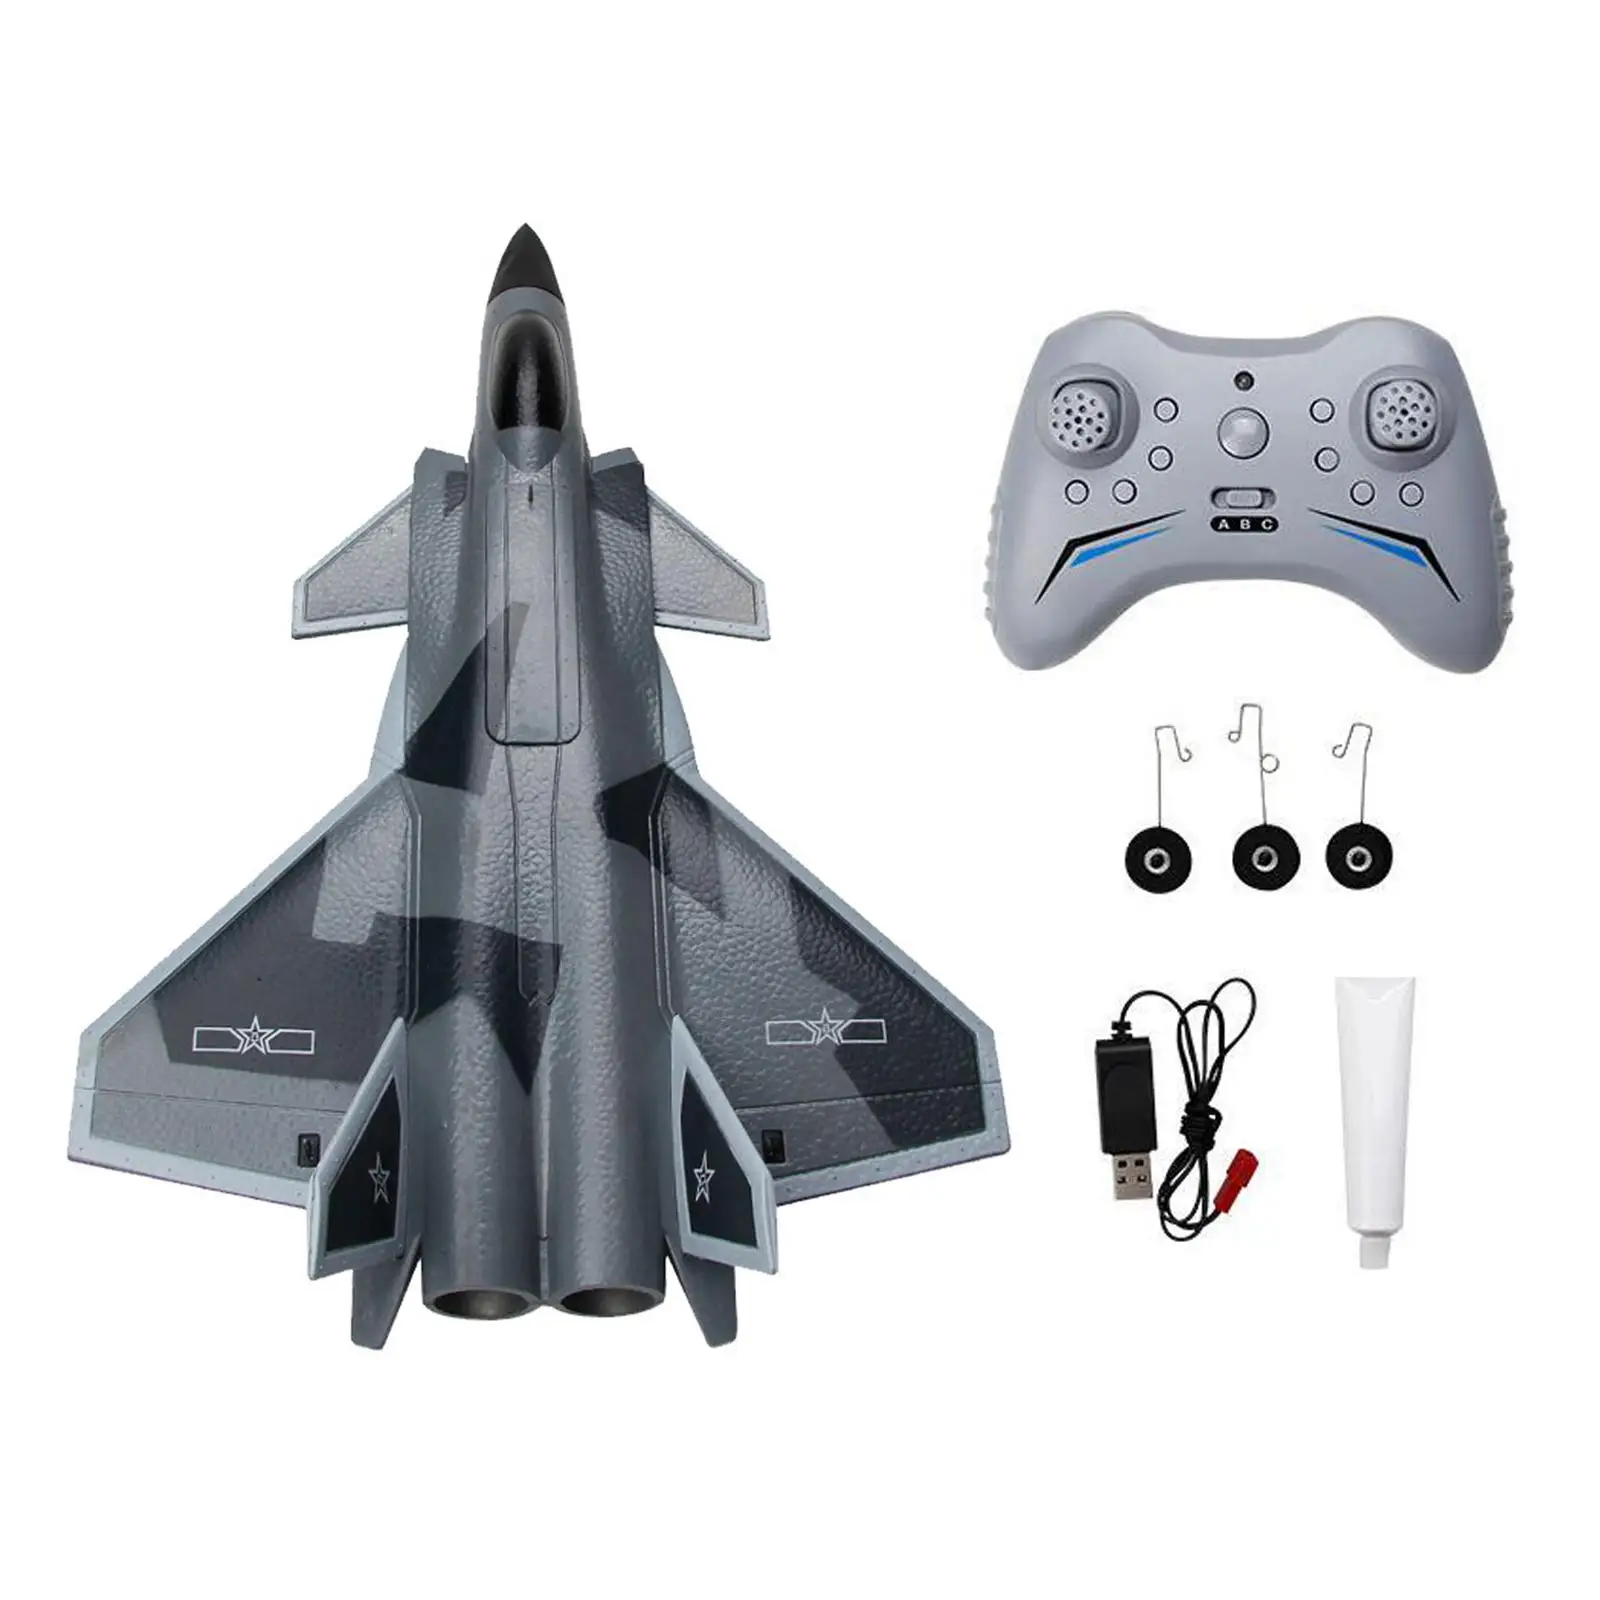 J20 Fighter Practical USB Charging Lightweight Kids Playset Multifunctional FX9630 RC Plane Gifts for Girls Boys Kids Beginners